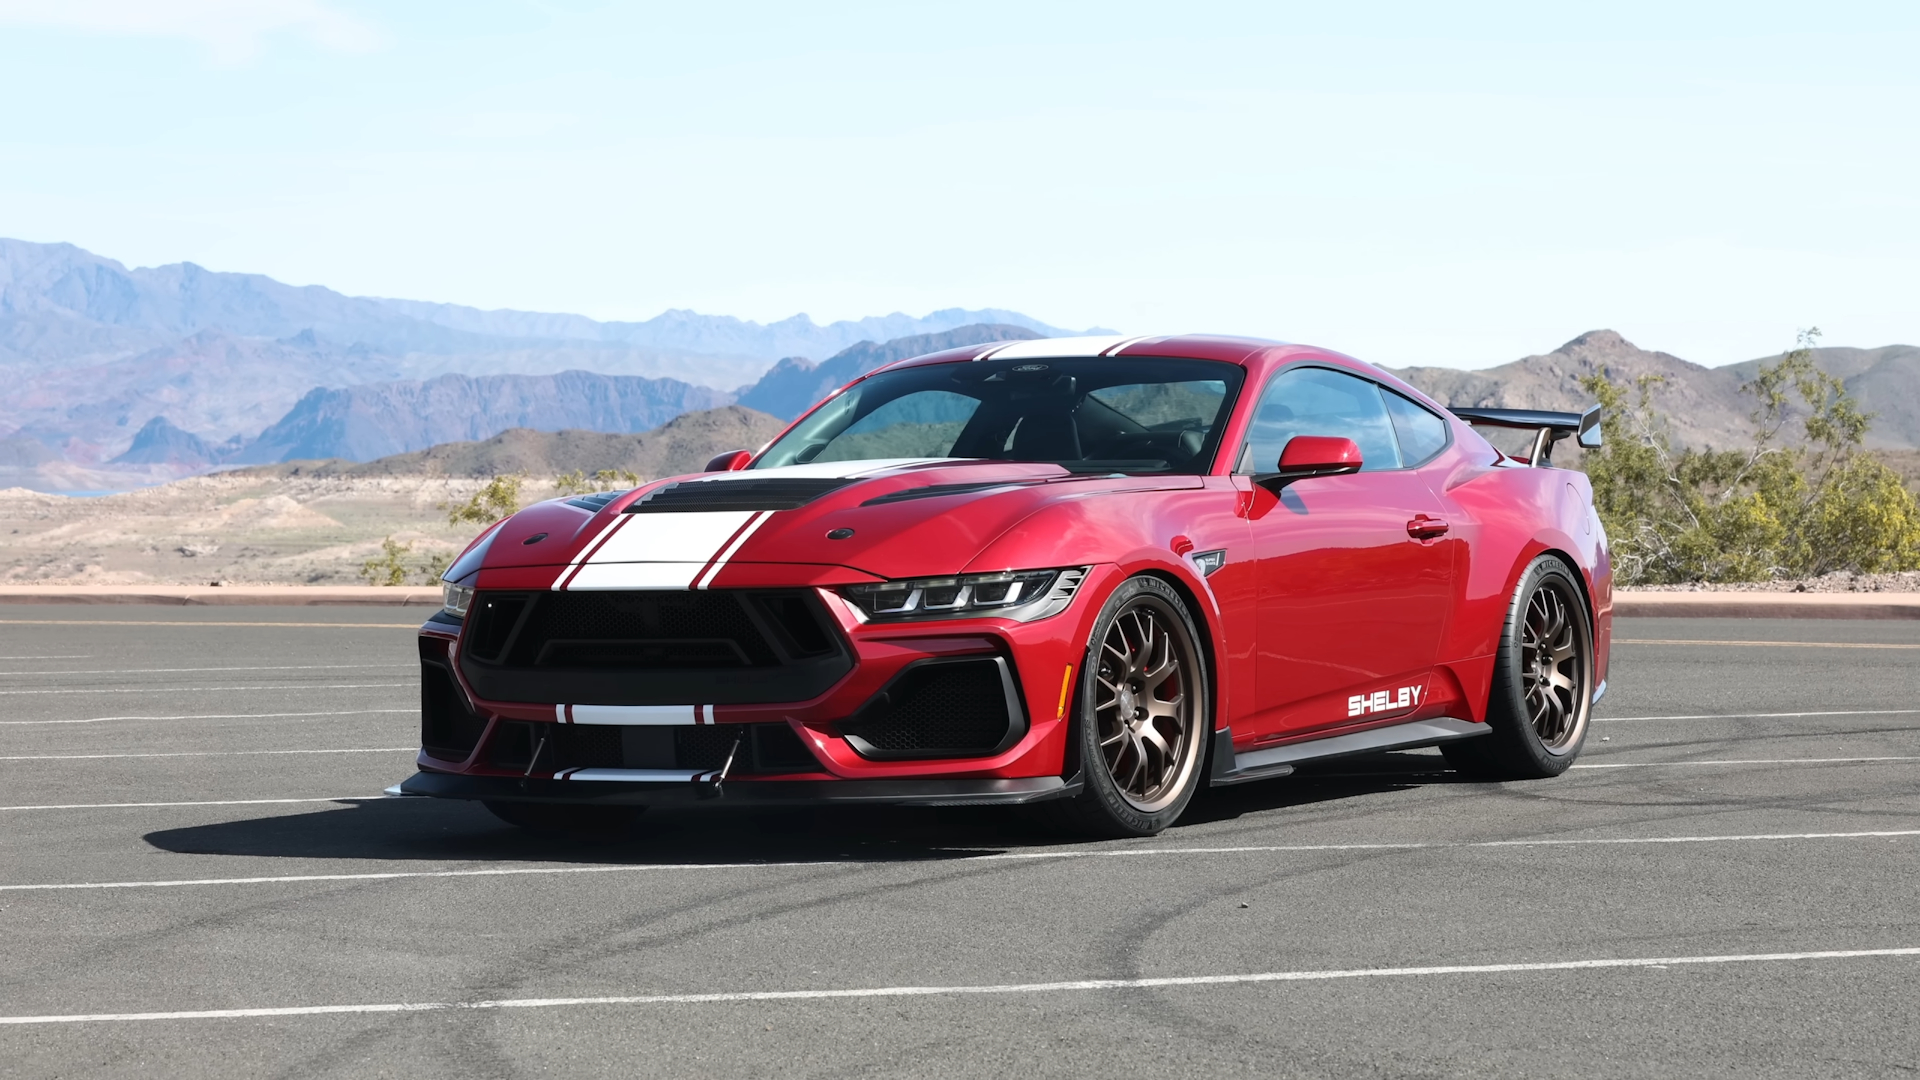 Shelby Car Muscle Cars Red Striped Ford Mustang 1920x1080